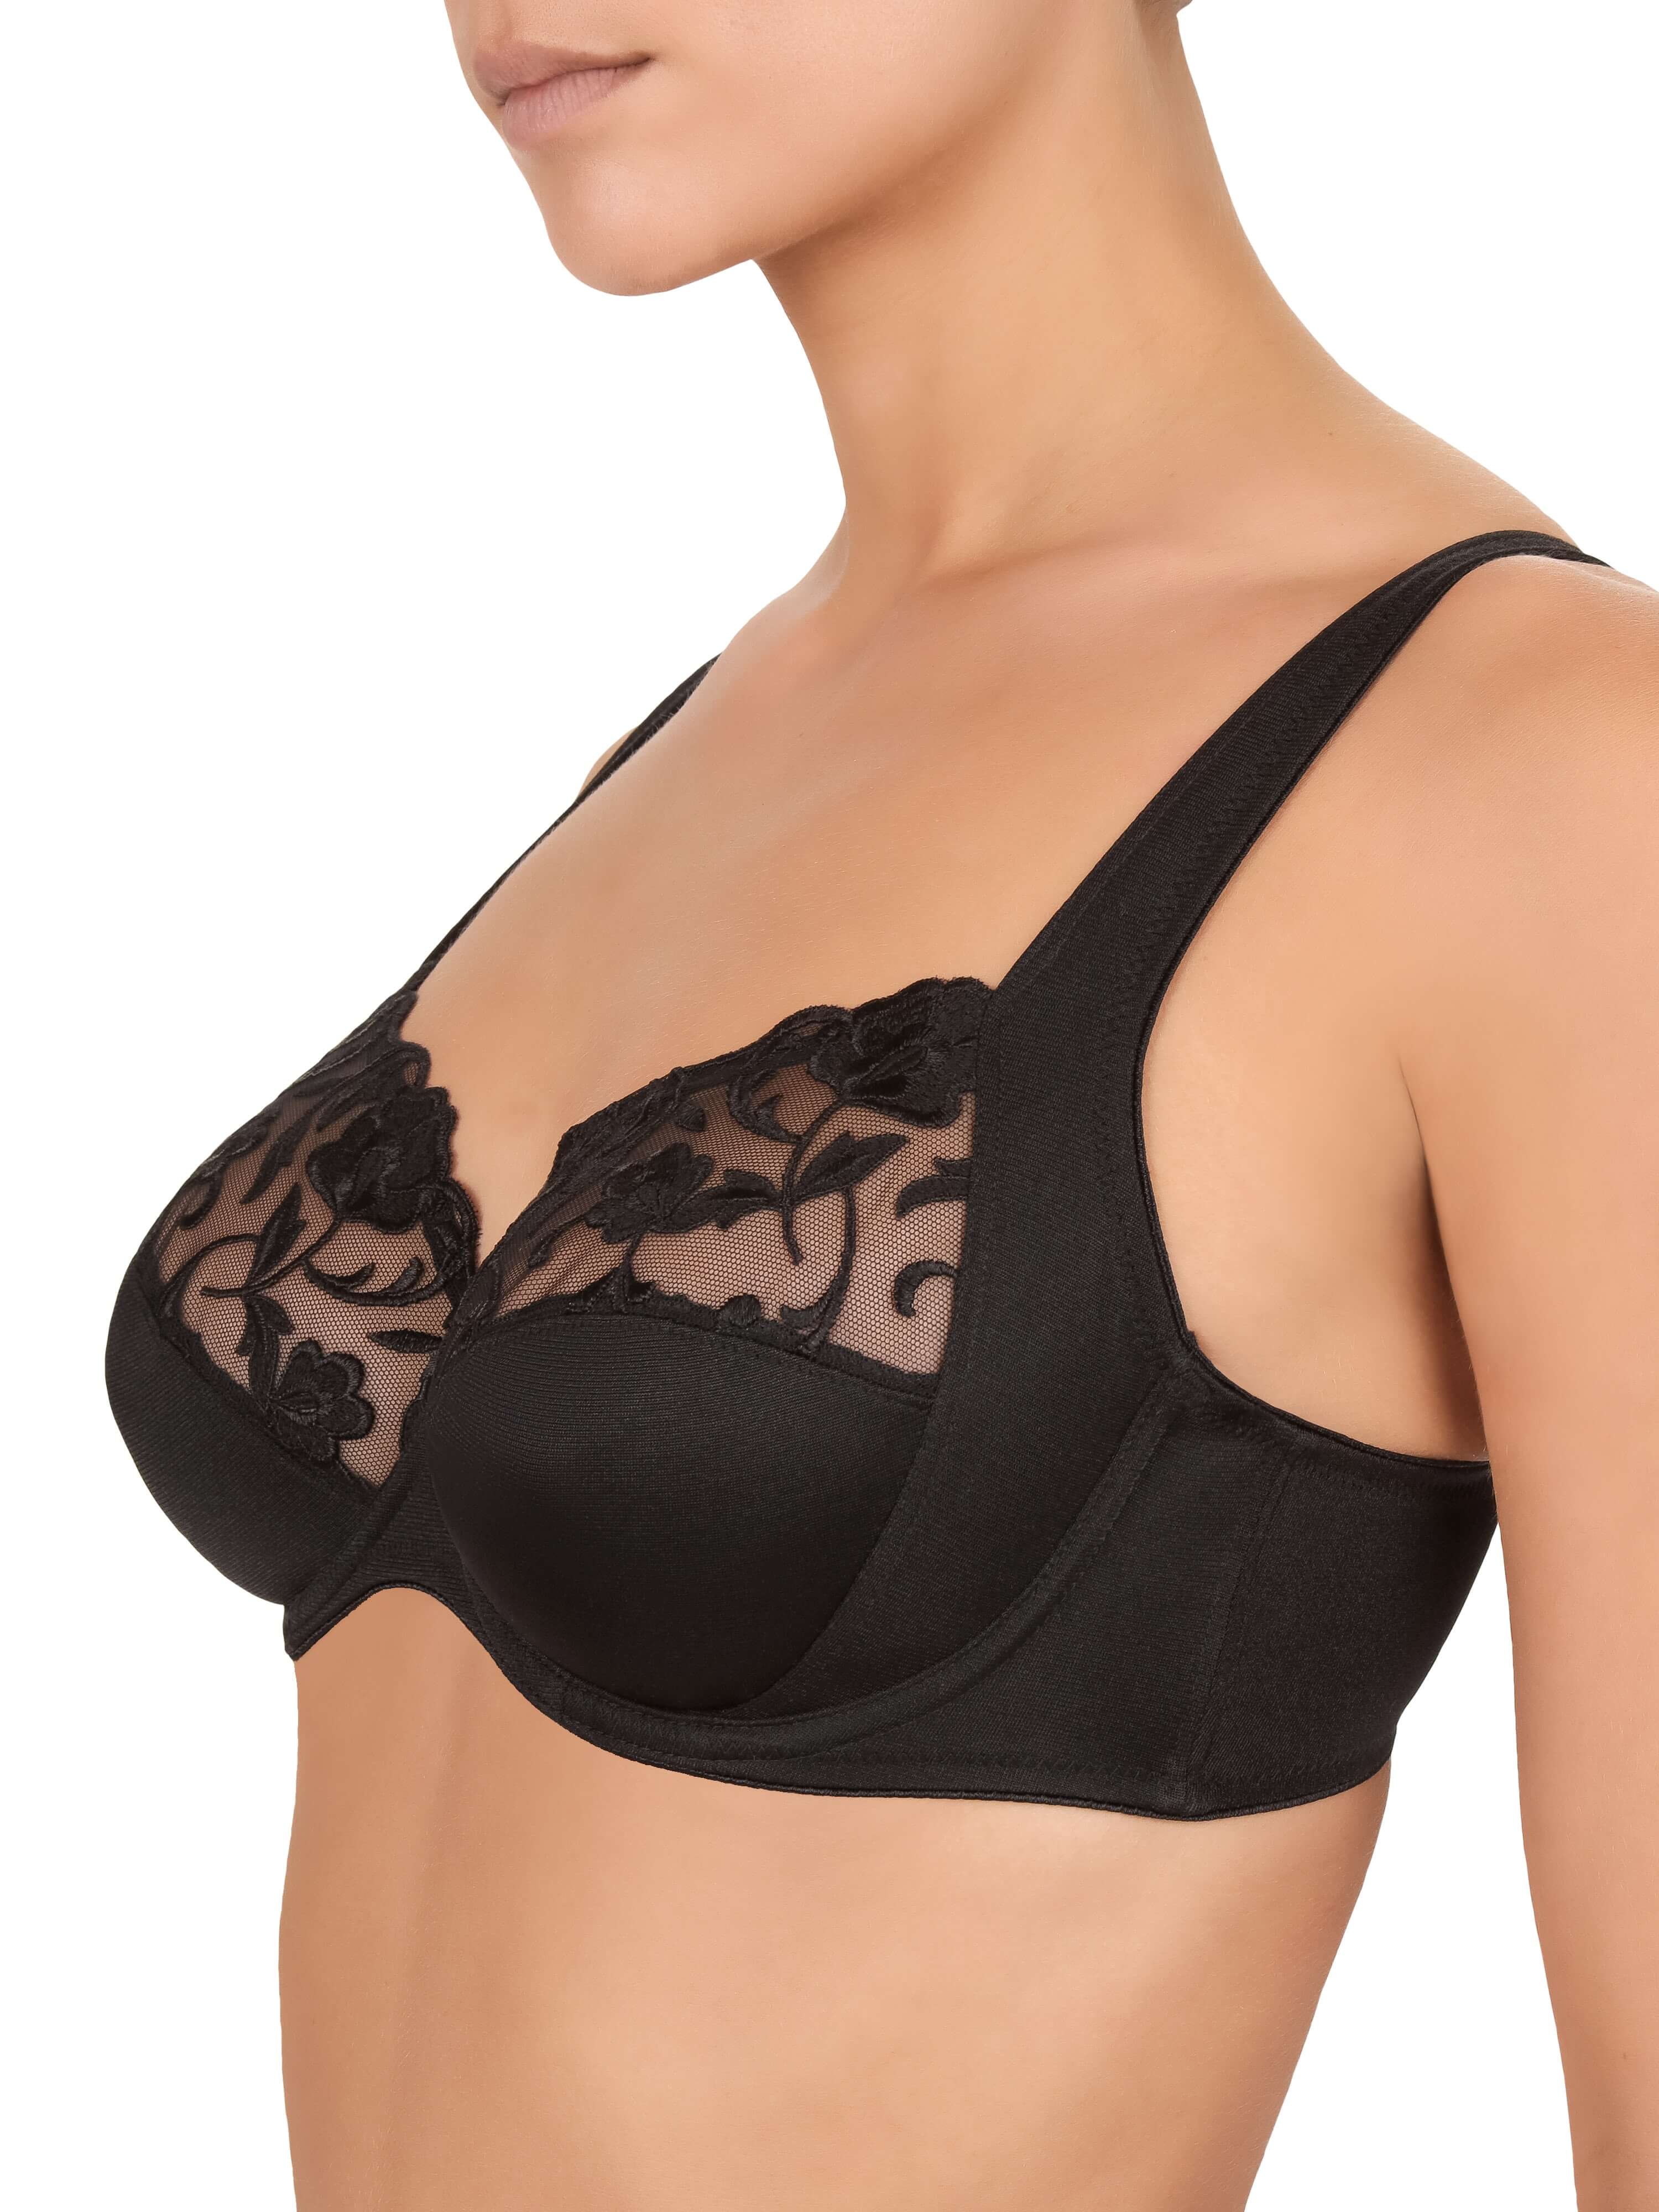 Moments by Felina Full bra with underwired cup